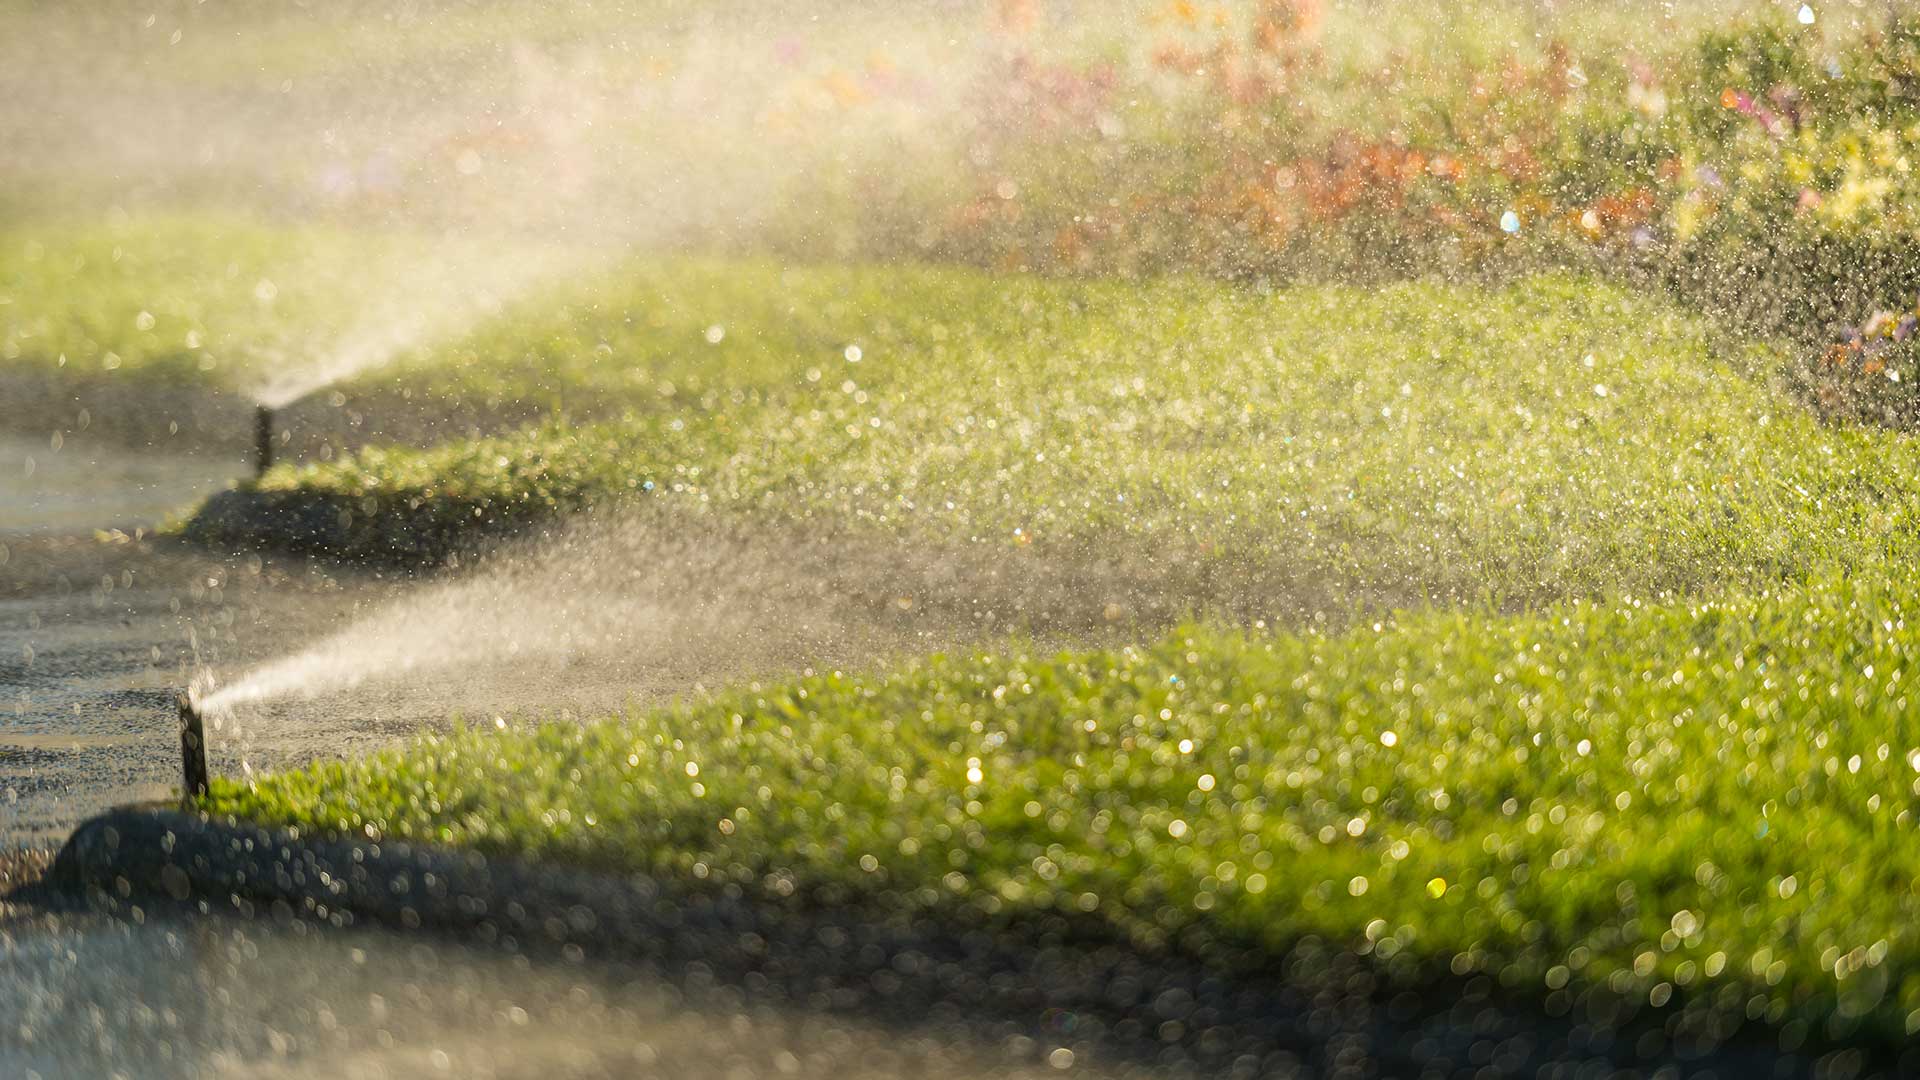 Rain vs Irrigation Water for your Lawn